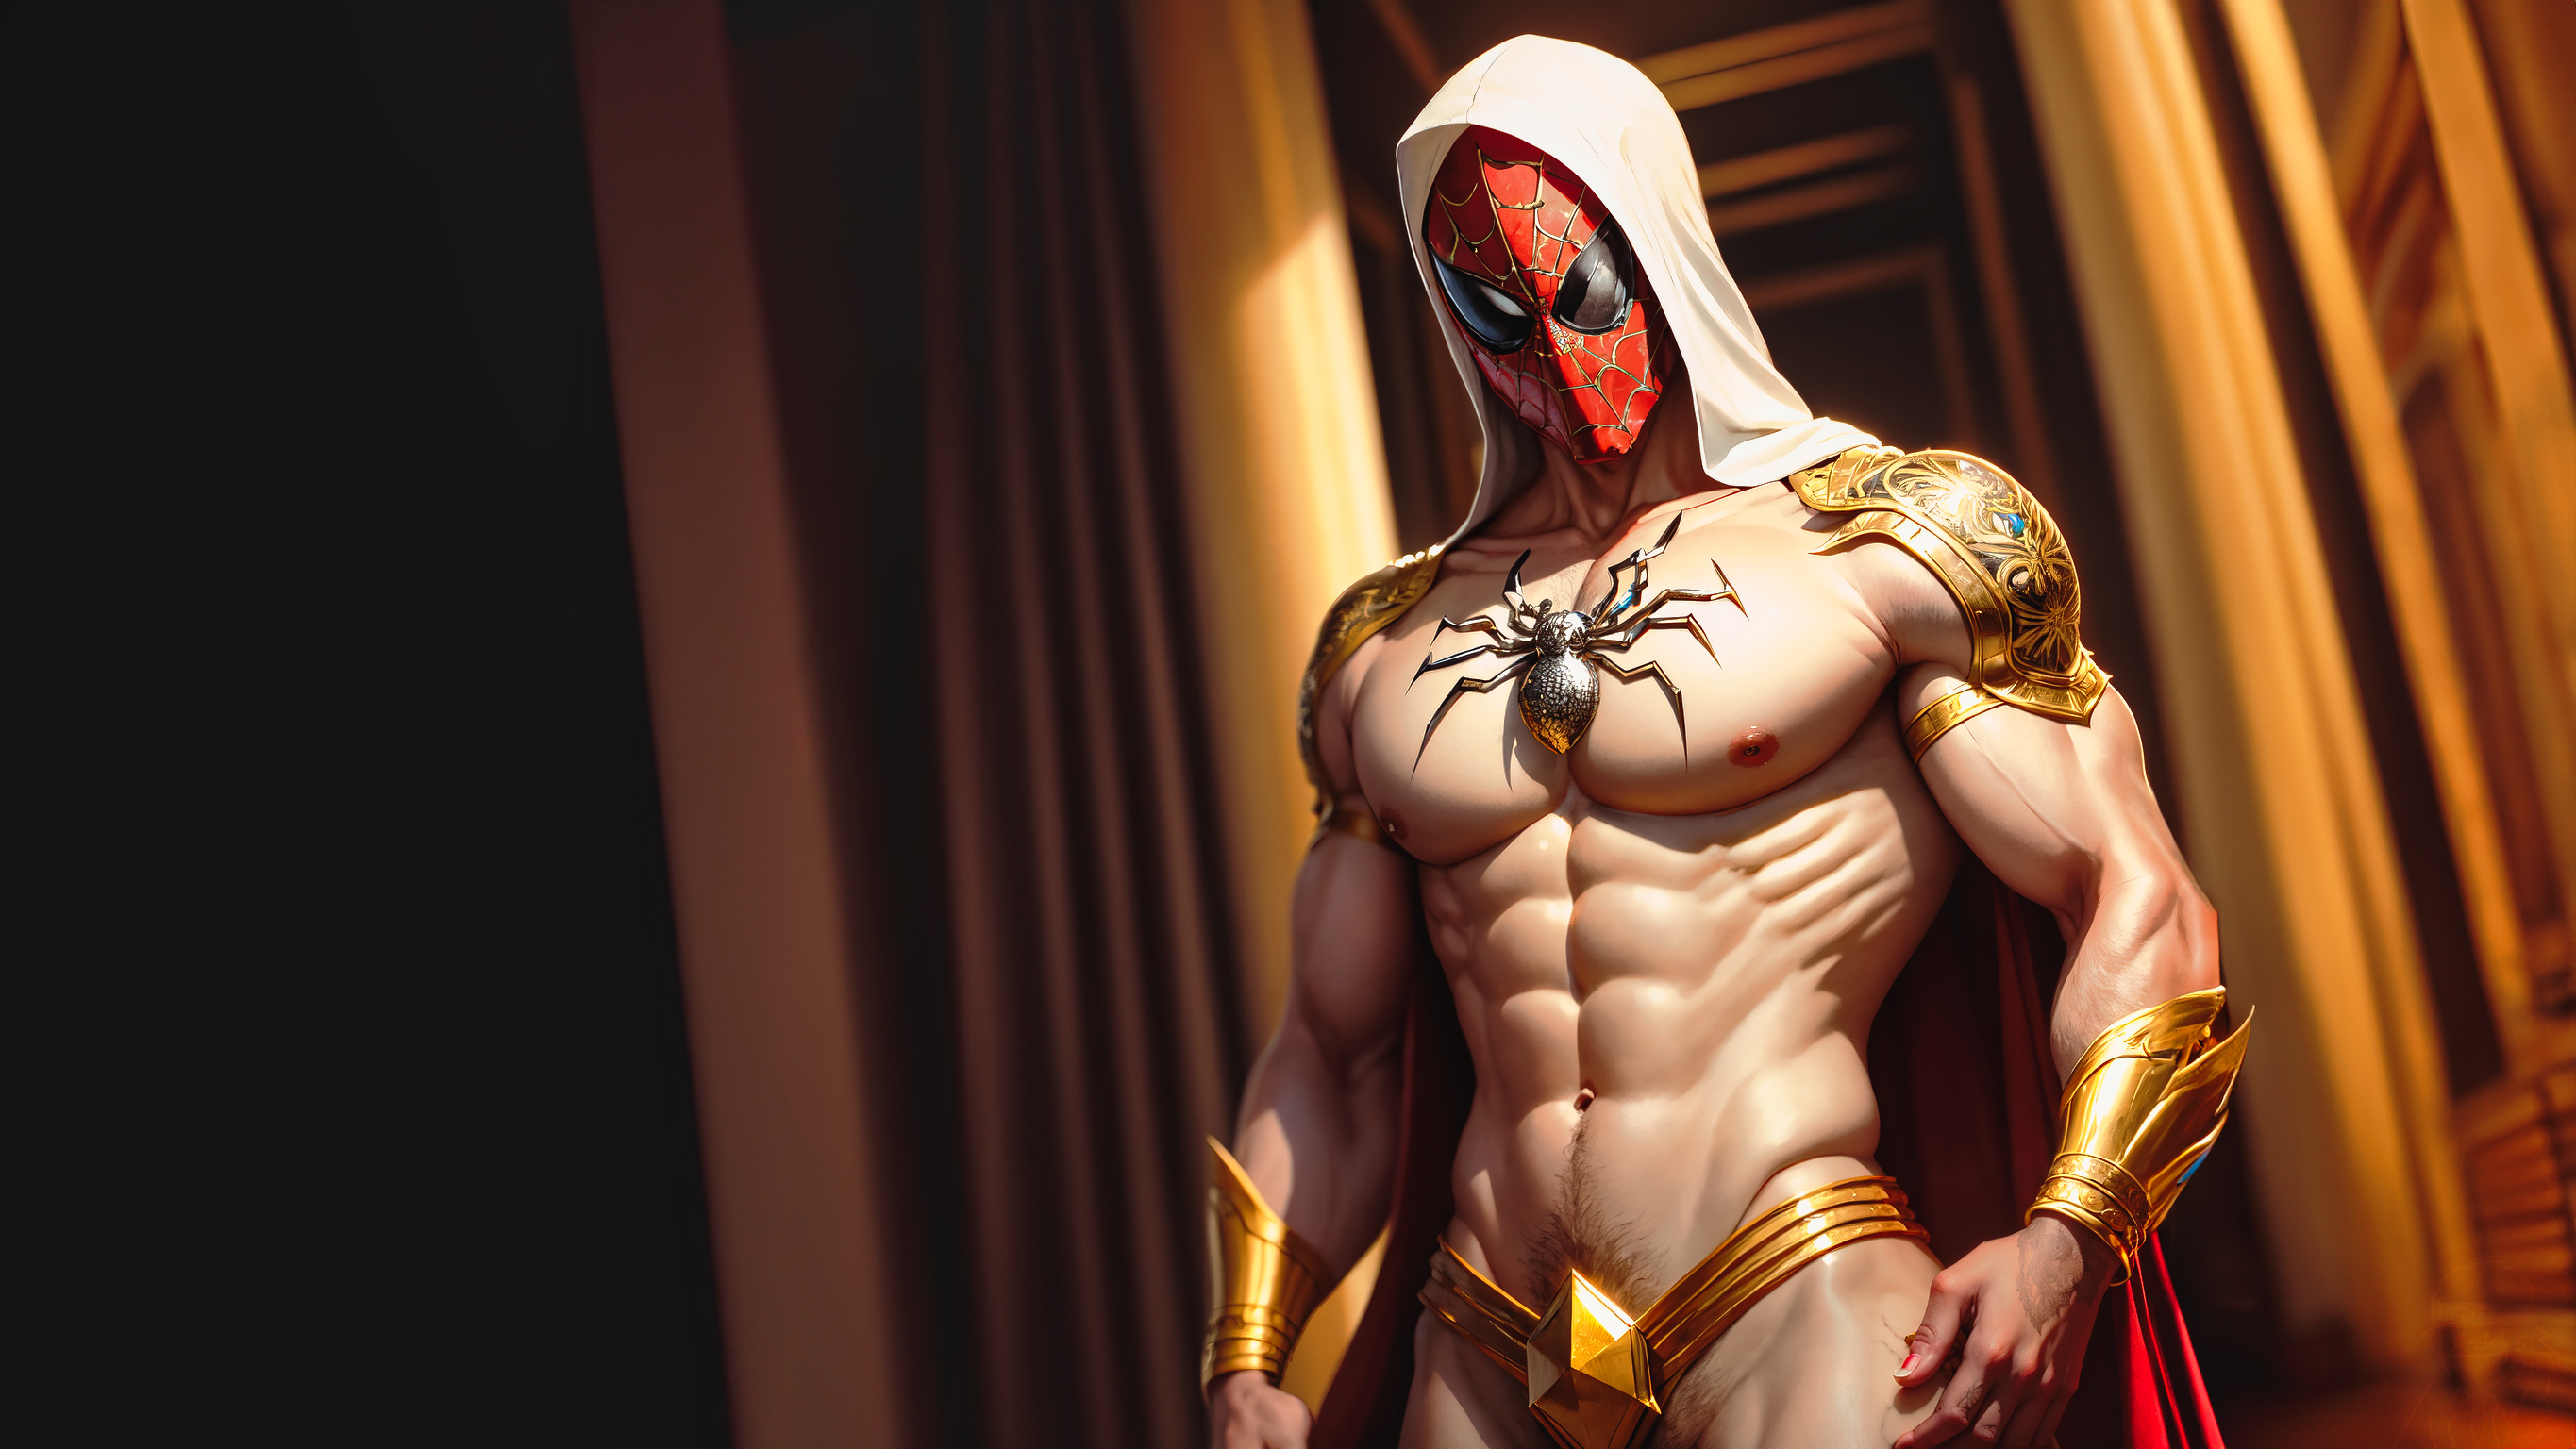 General 2730x1536 AI art dar0z digital art Spider-Man Egyptian mythology Egypt warrior shirtless ancient comic character portrait display abs muscles pubic hair looking at viewer mask blurred blurry background superhero